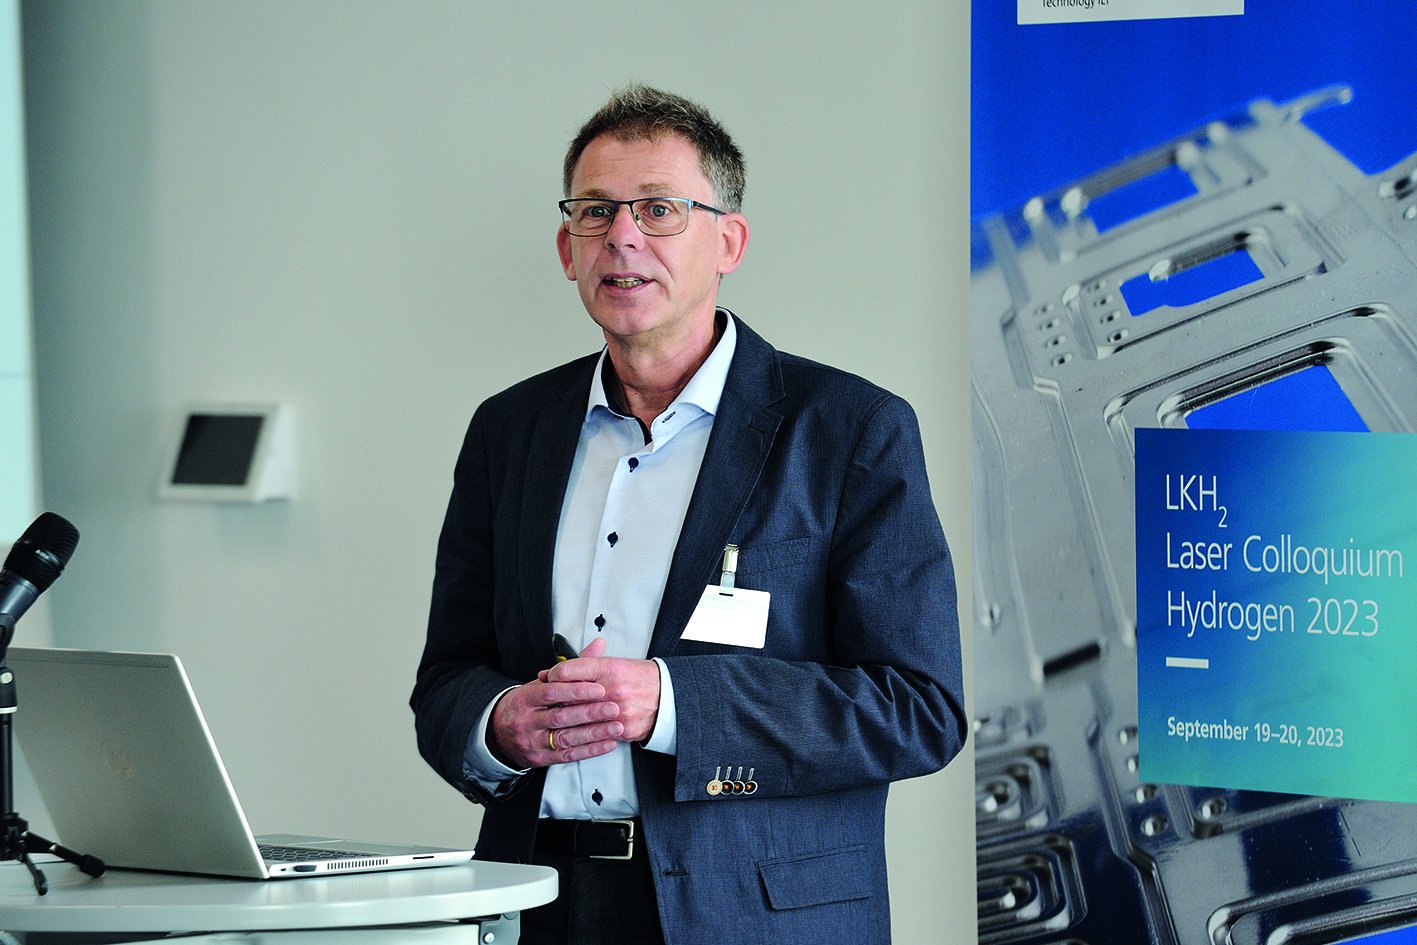 Dr. Frank Schneider, head of the Cutting Group at Fraunhofer ILT: “If the cutting processes are suitably designed and distributed, the processing time for a welded anode-cathode pair can be reduced to one second.”